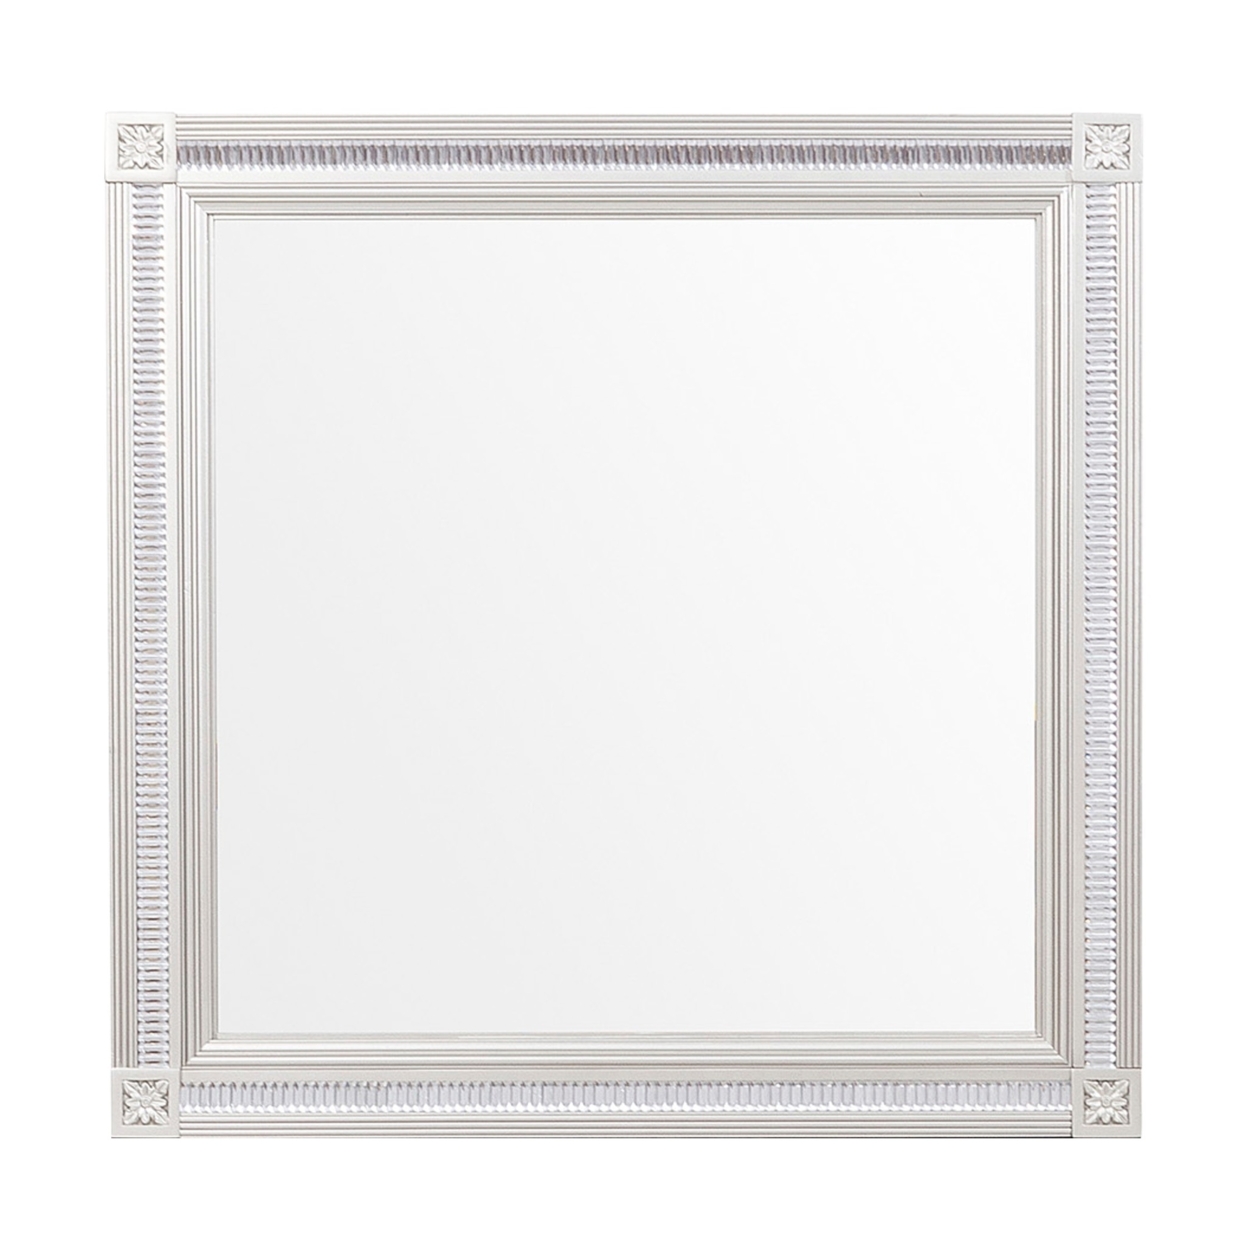 Wooden Square Mirror With Carvings And Bevelled Edges, Silver- Saltoro Sherpi